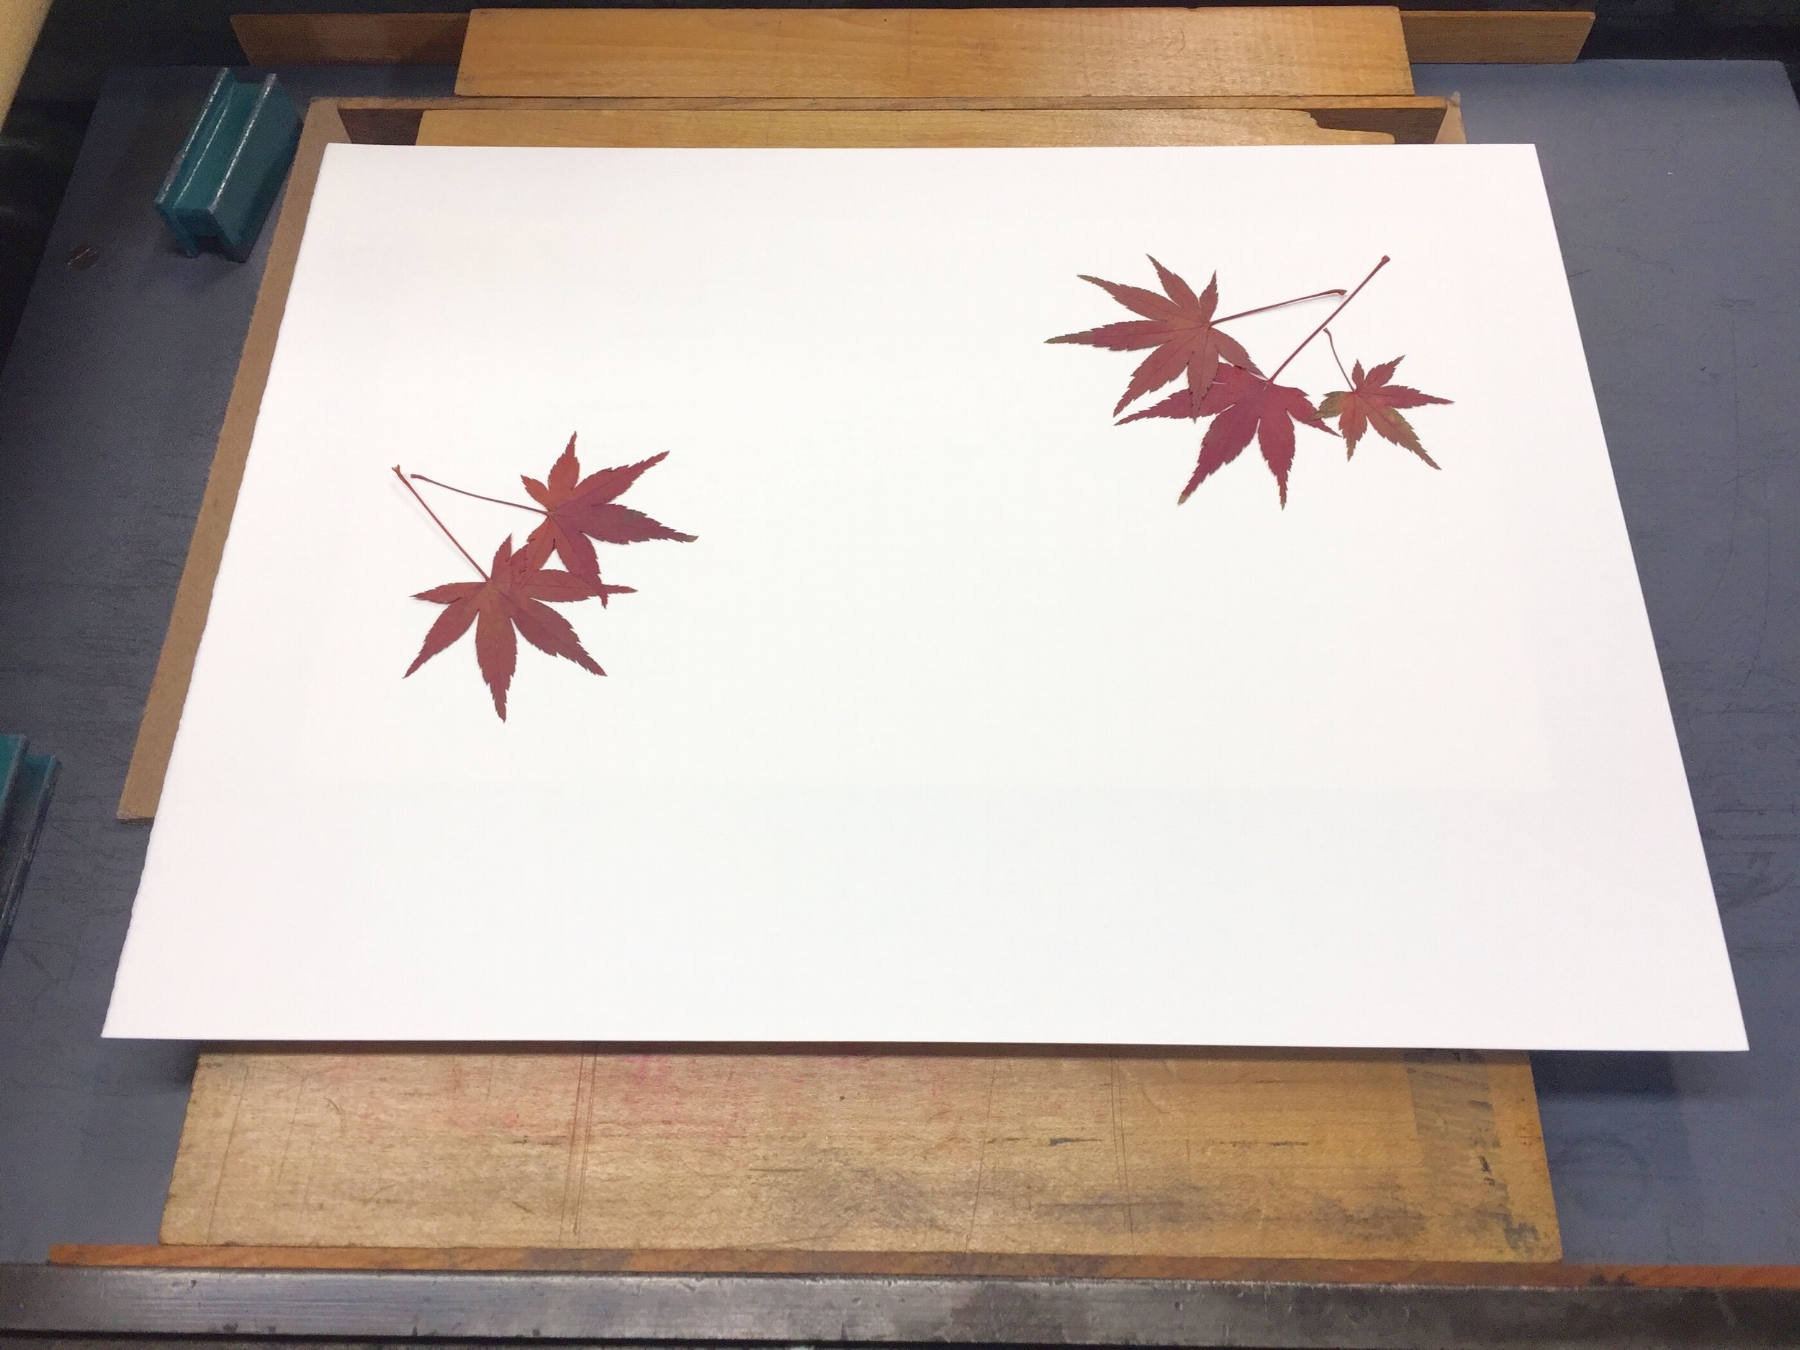  Next, with a pair of tweezers I carefully picked up a leaf by its stem from the ink plate and placed it where I wanted on the book page. Sometimes I overlapped leaves, which created a sense of depth in the final print. 